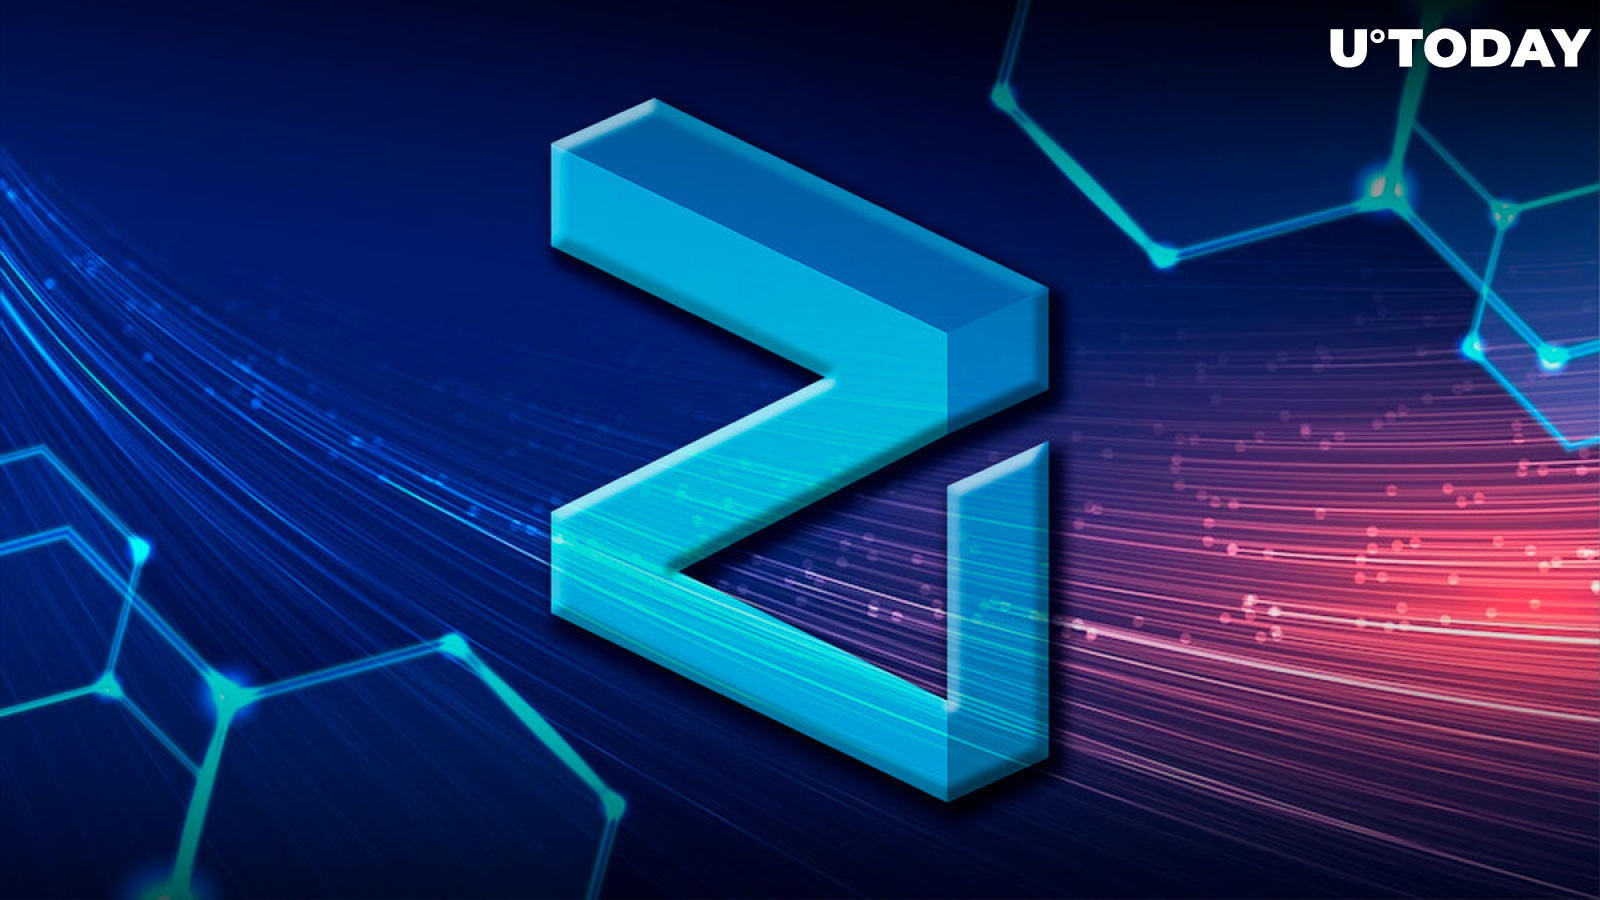 Zilliqa (ZIL) Founder Explains Why Ethereum (ETH) Is Better Than Other L1s